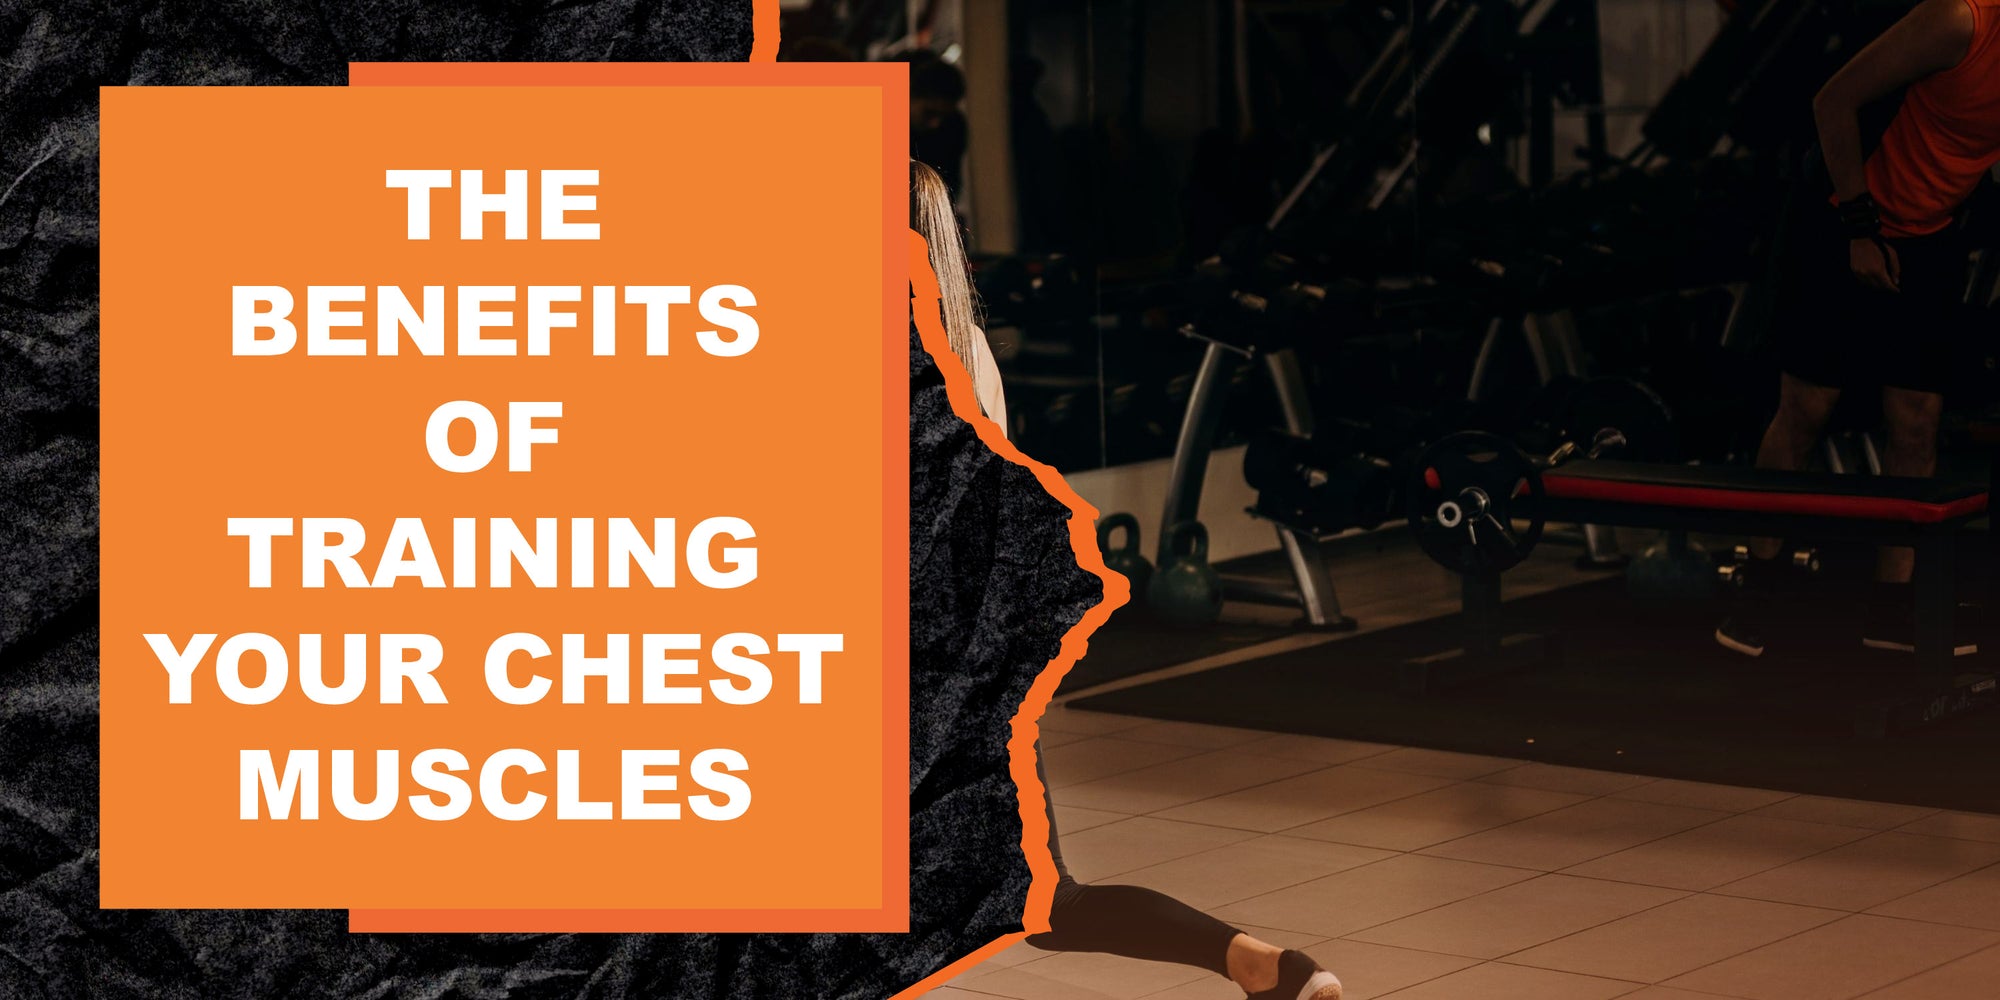 The Benefits of Training Your Chest Muscles